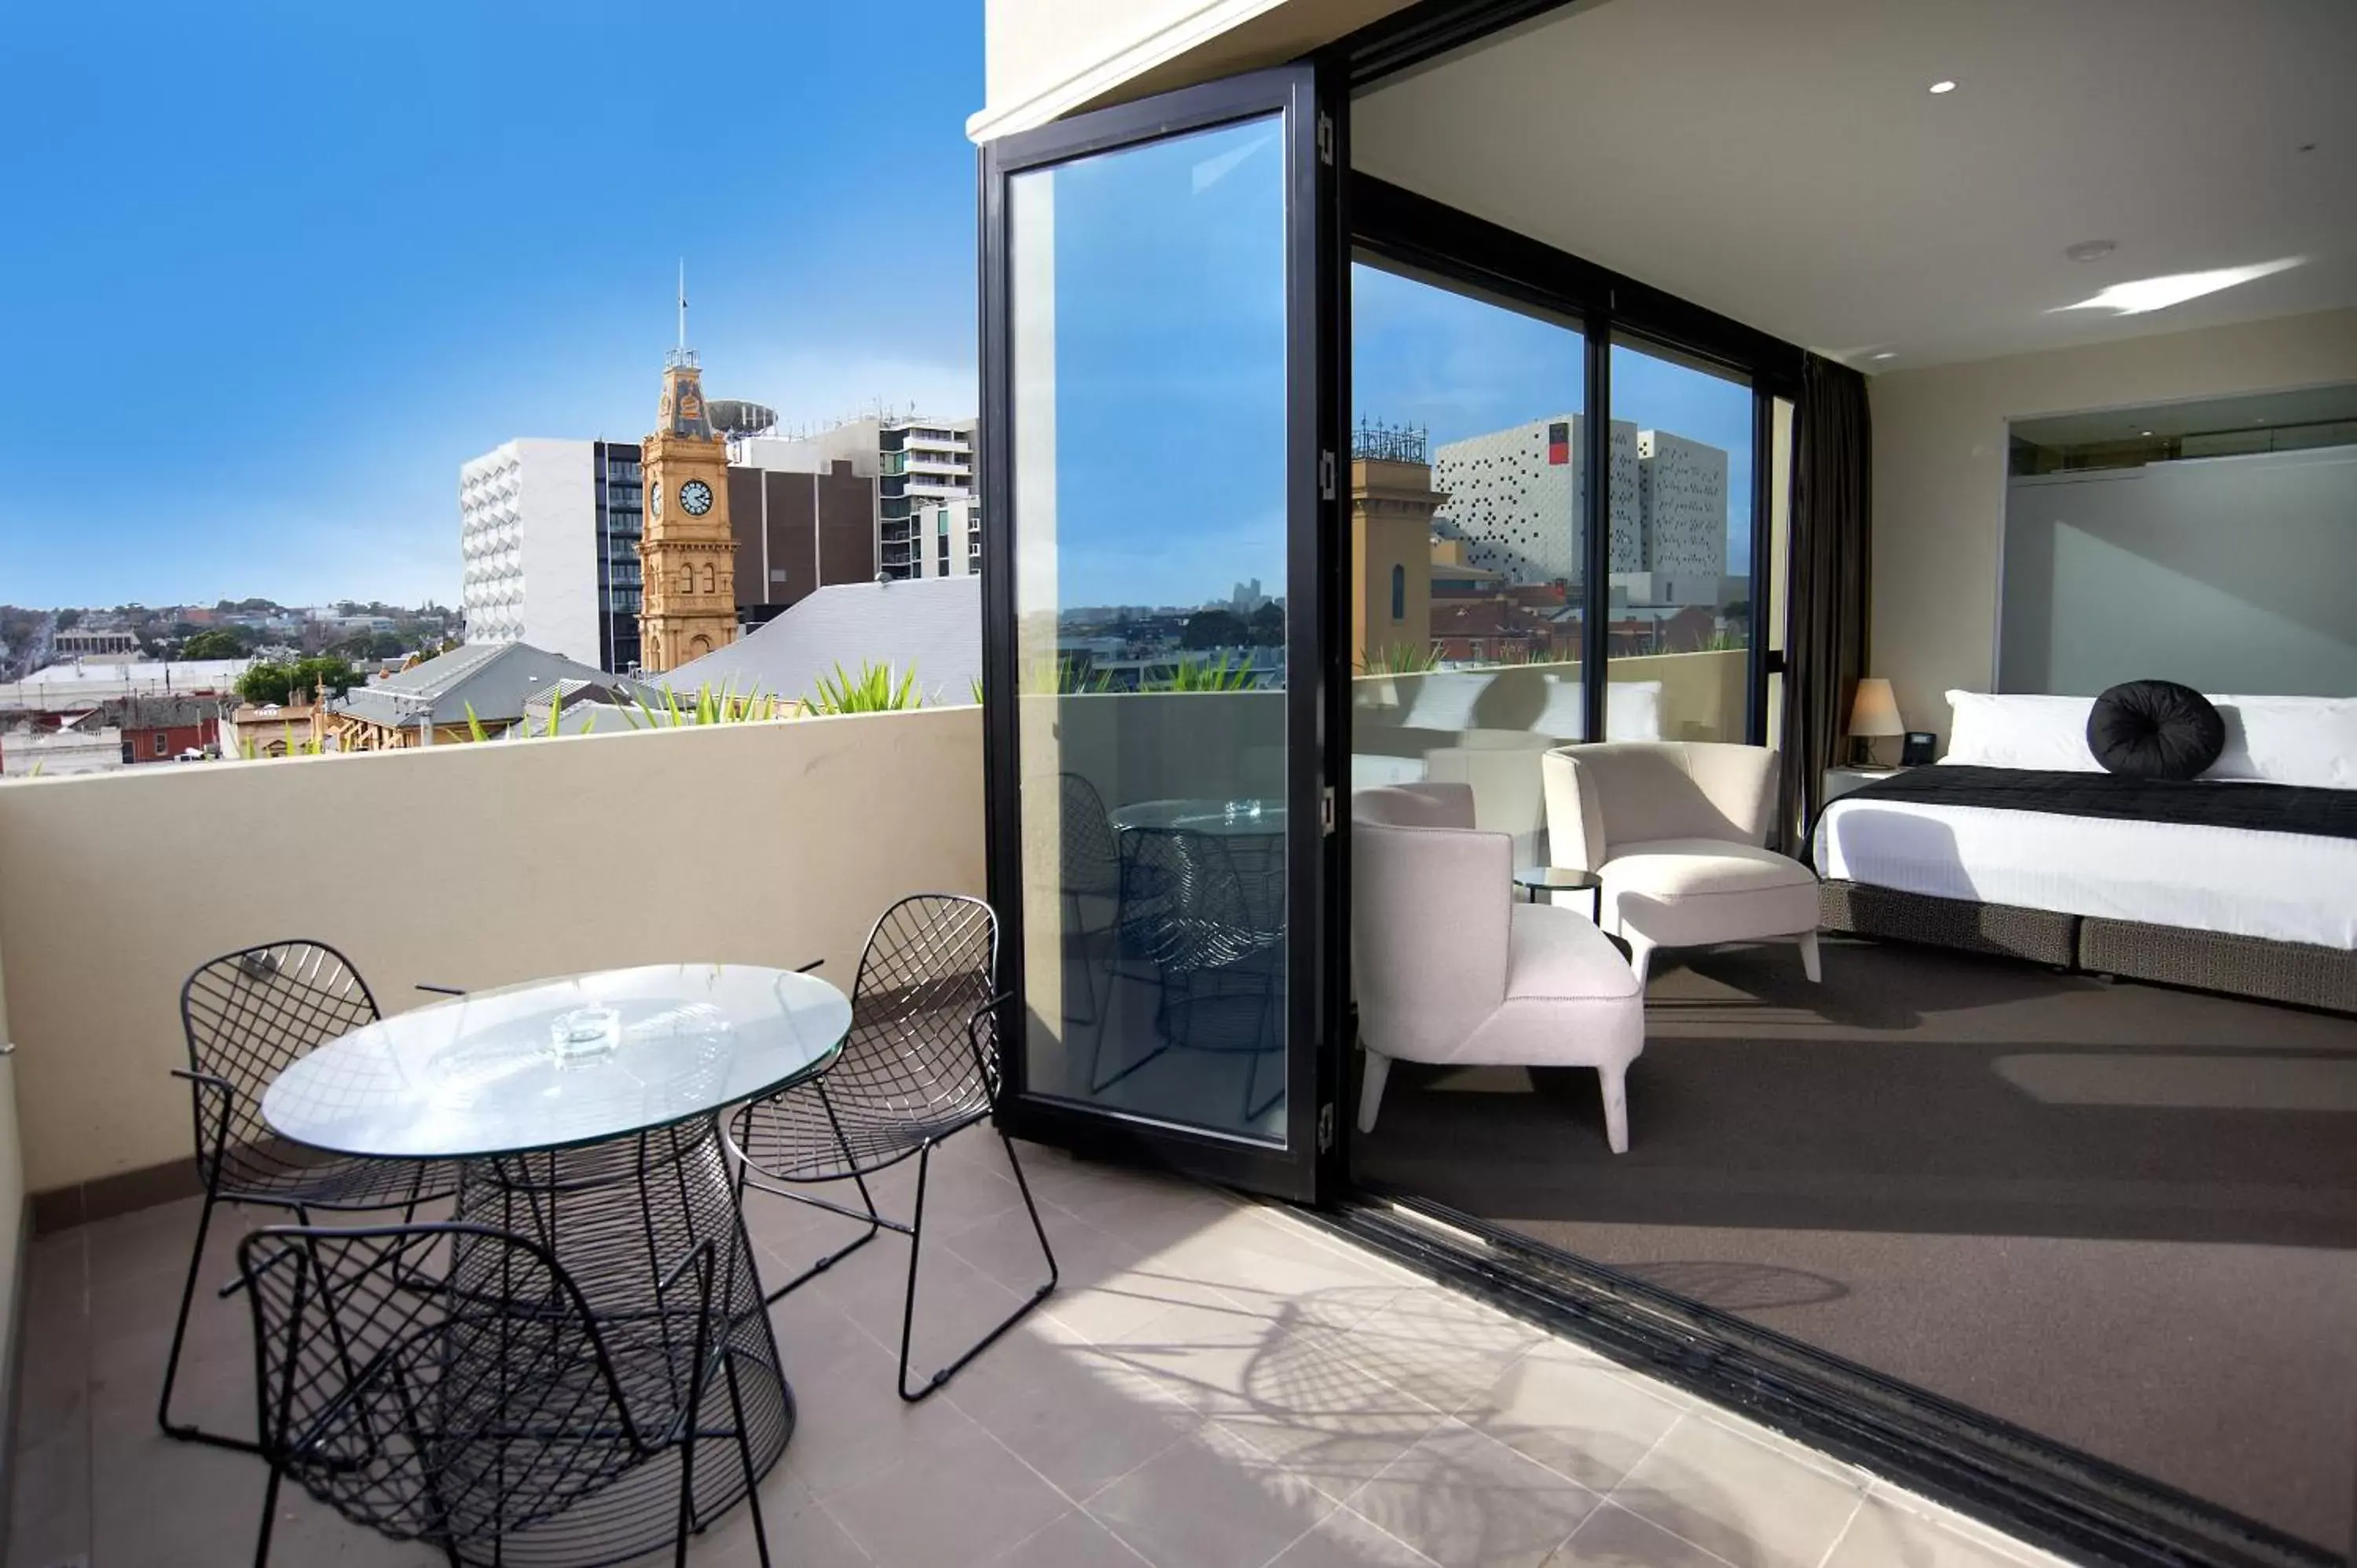 Balcony/Terrace in Corporate Living Accommodation Hawthorn